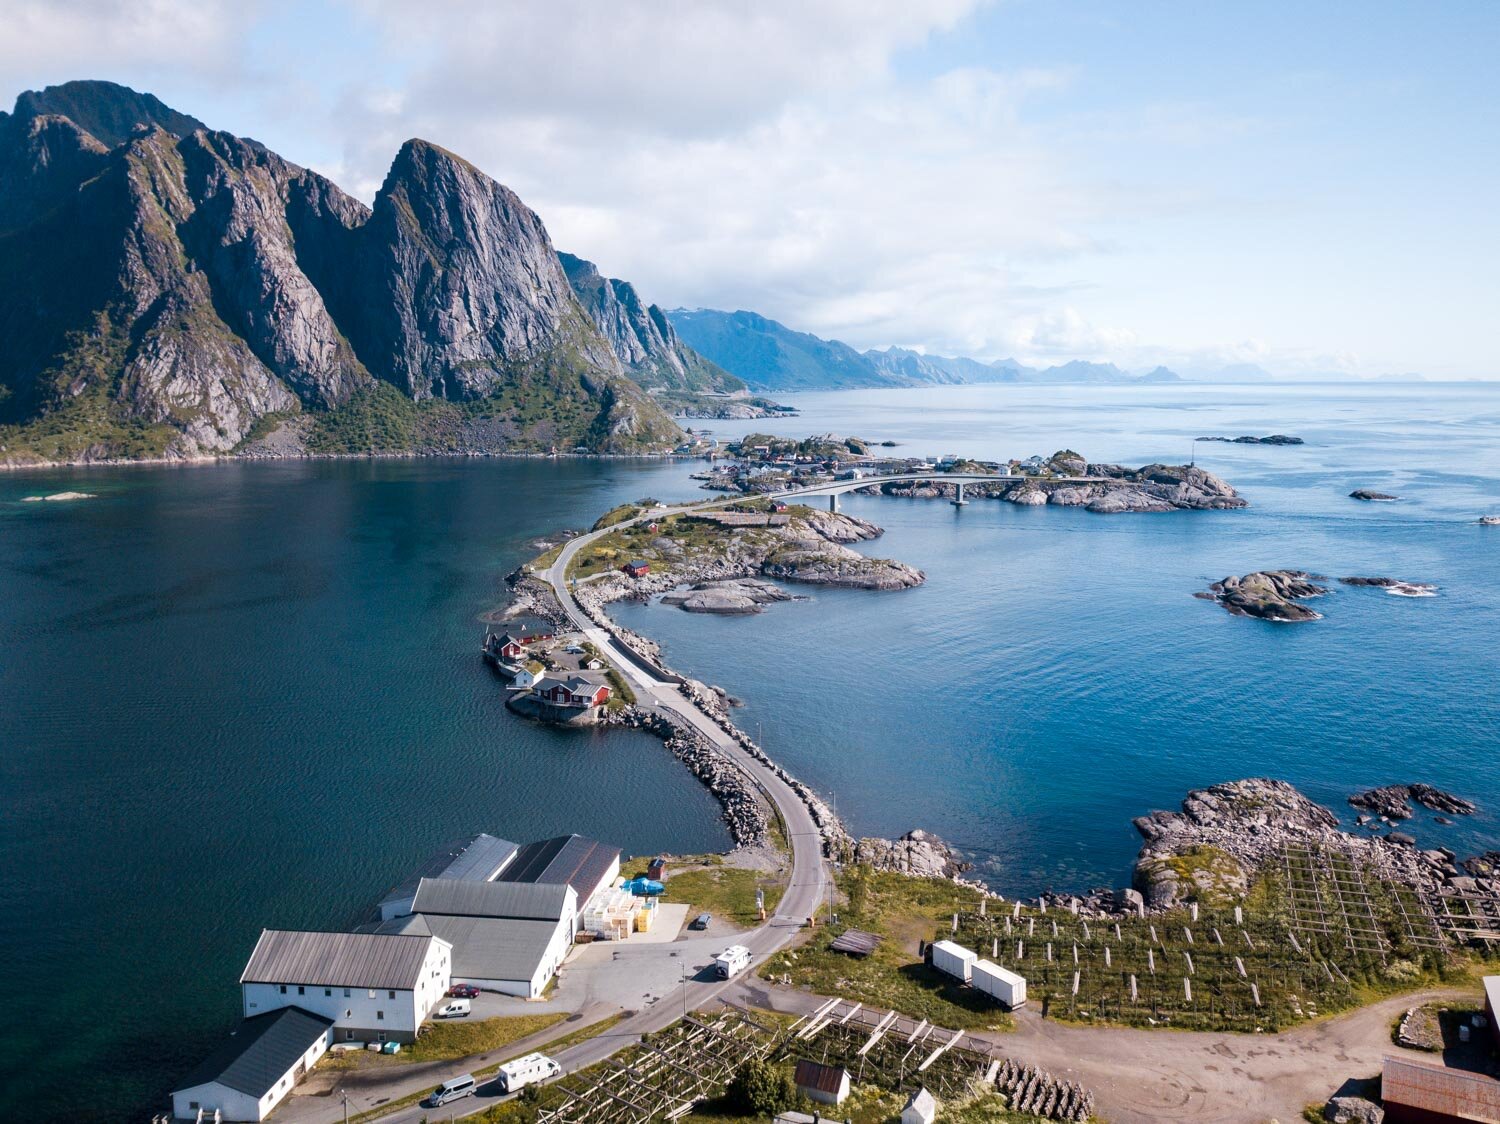 What to do in Lofoten Islands